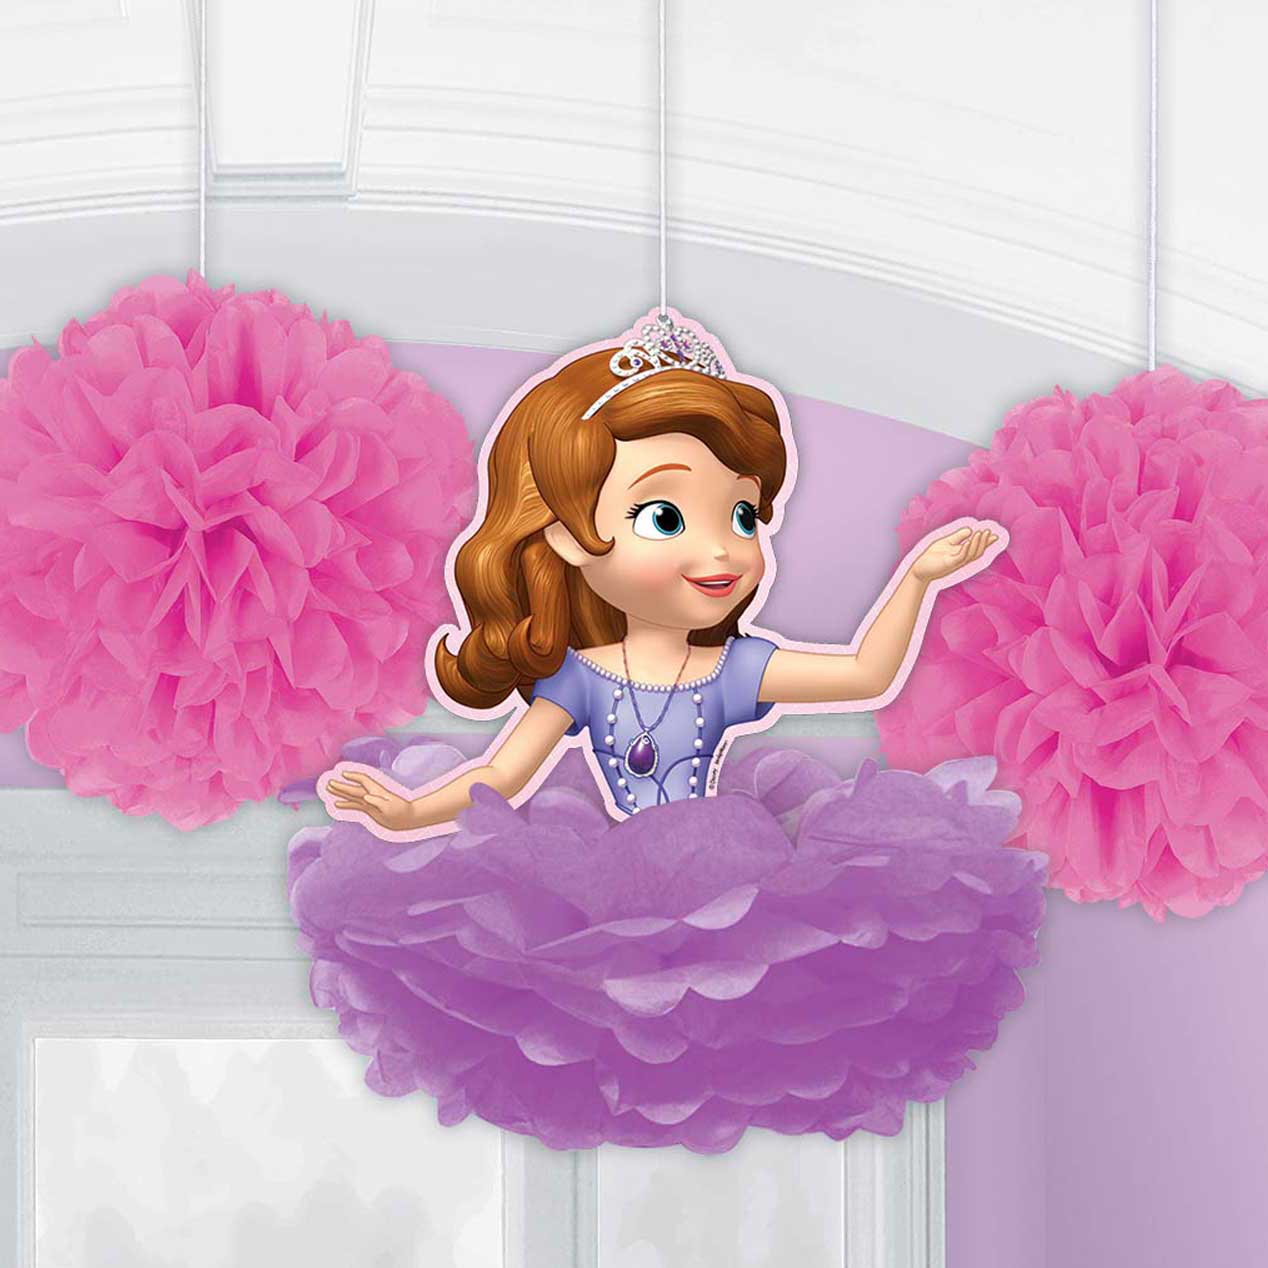 Sofia The First Fluffy Decorations 3pcs Decorations - Party Centre